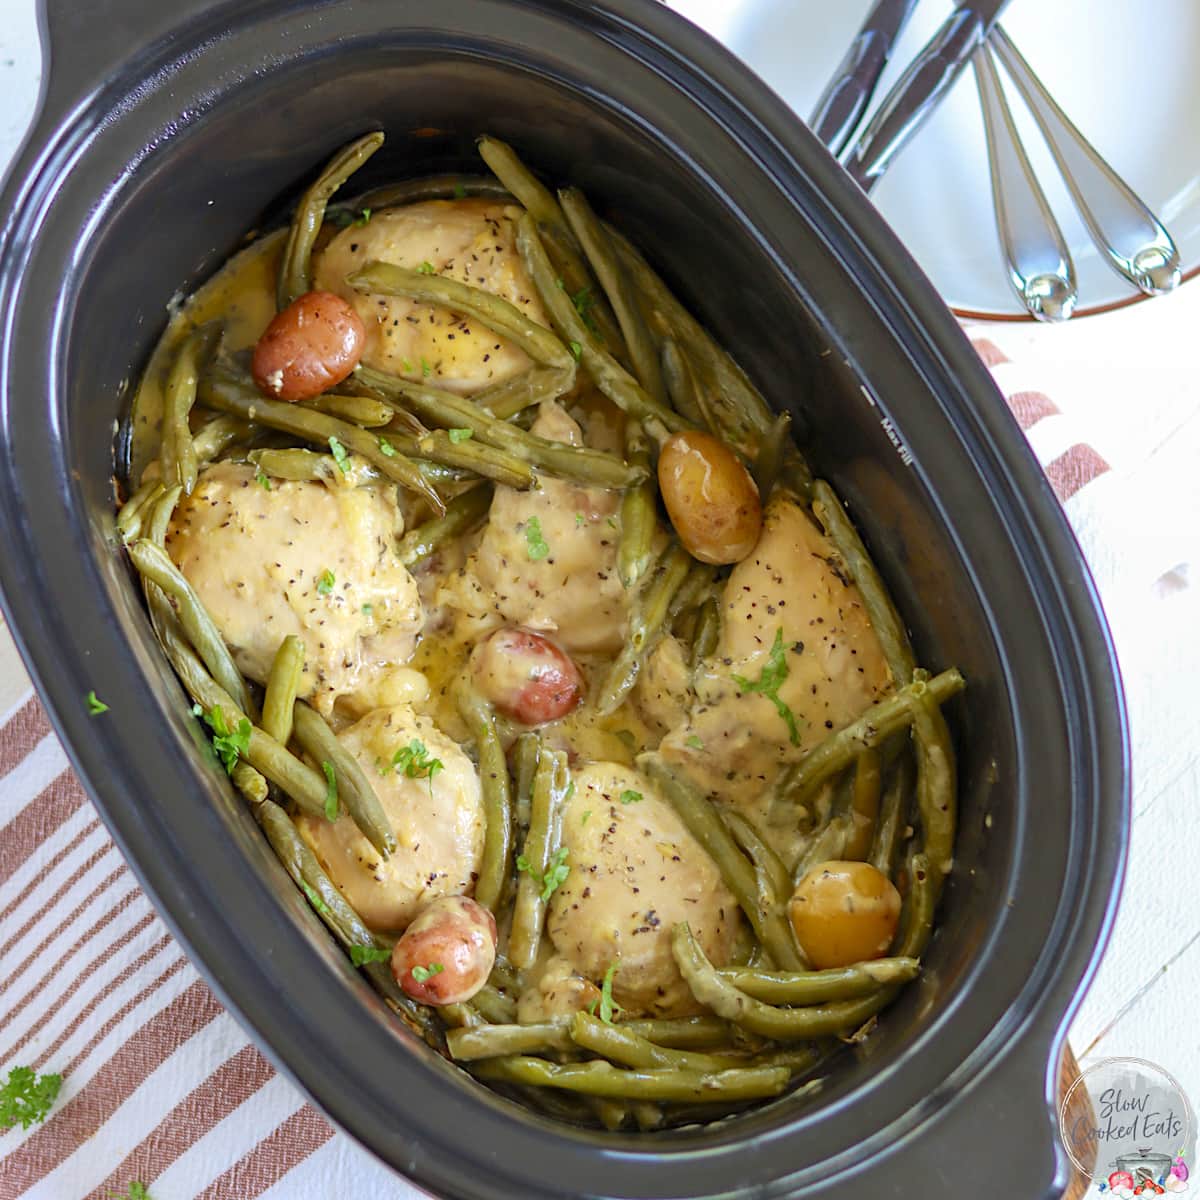 A black oval crock pot with cooked chicken thighs, potatoes, and green beans.